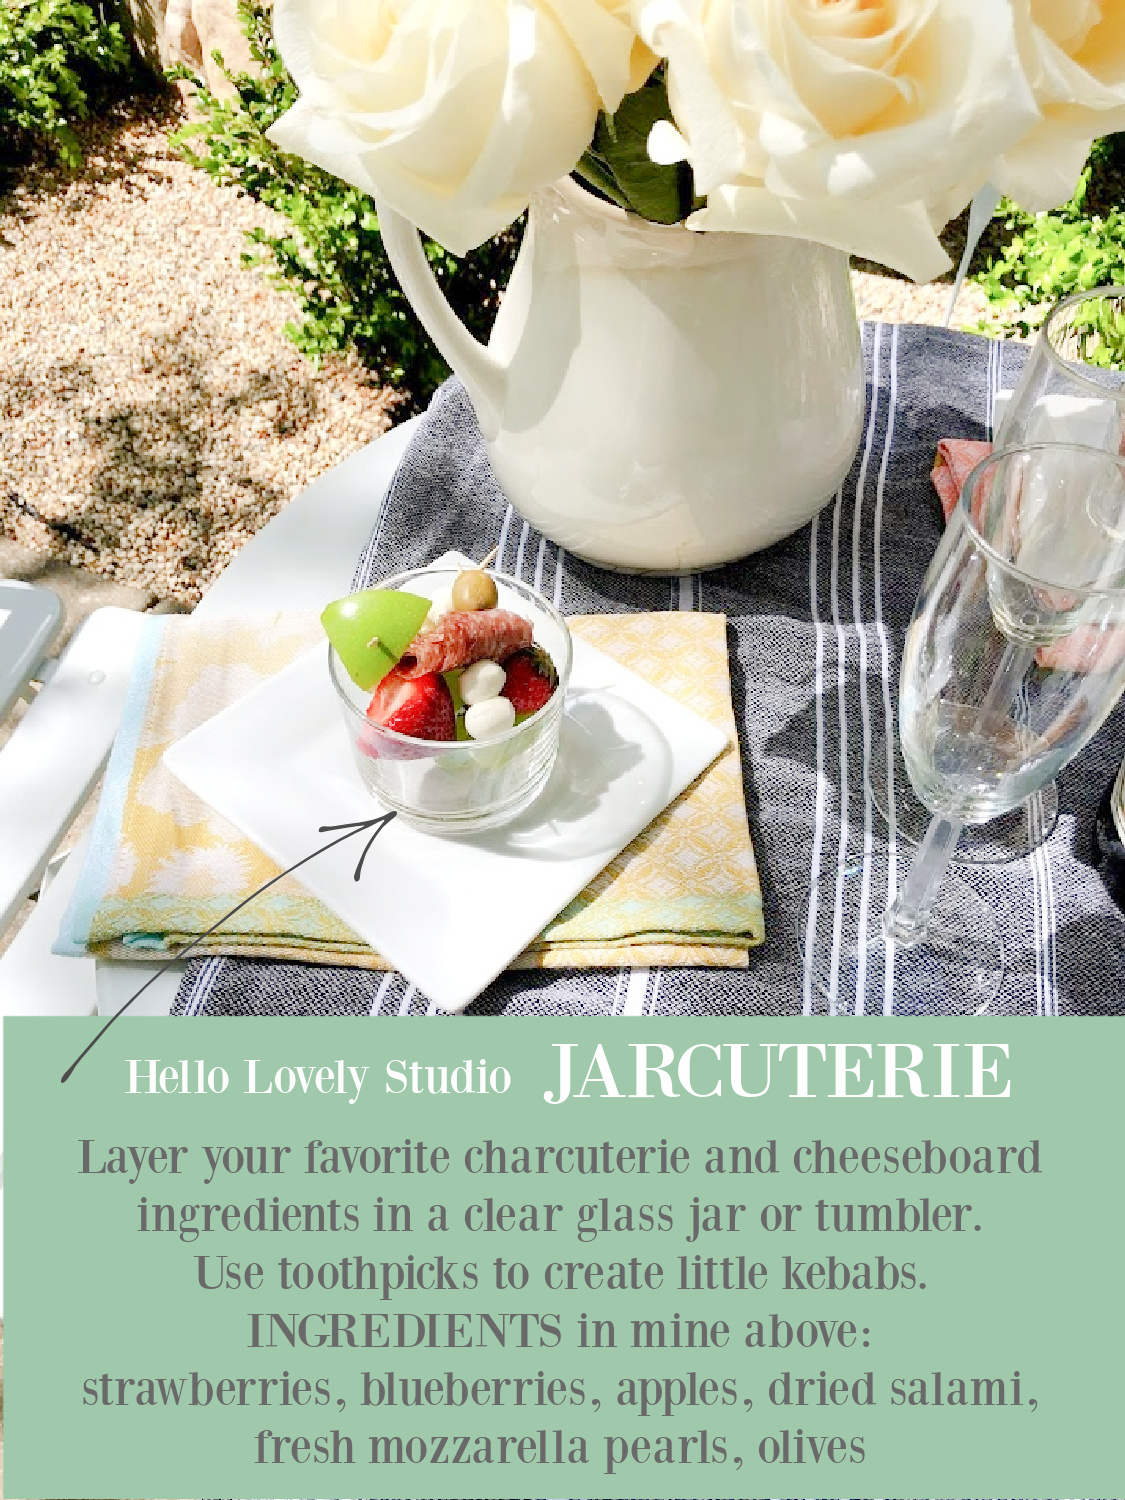 Jarcuterie easy idea for individual charcuterie jars and spring brunch with Frenchy style - Hello Lovely Studio.